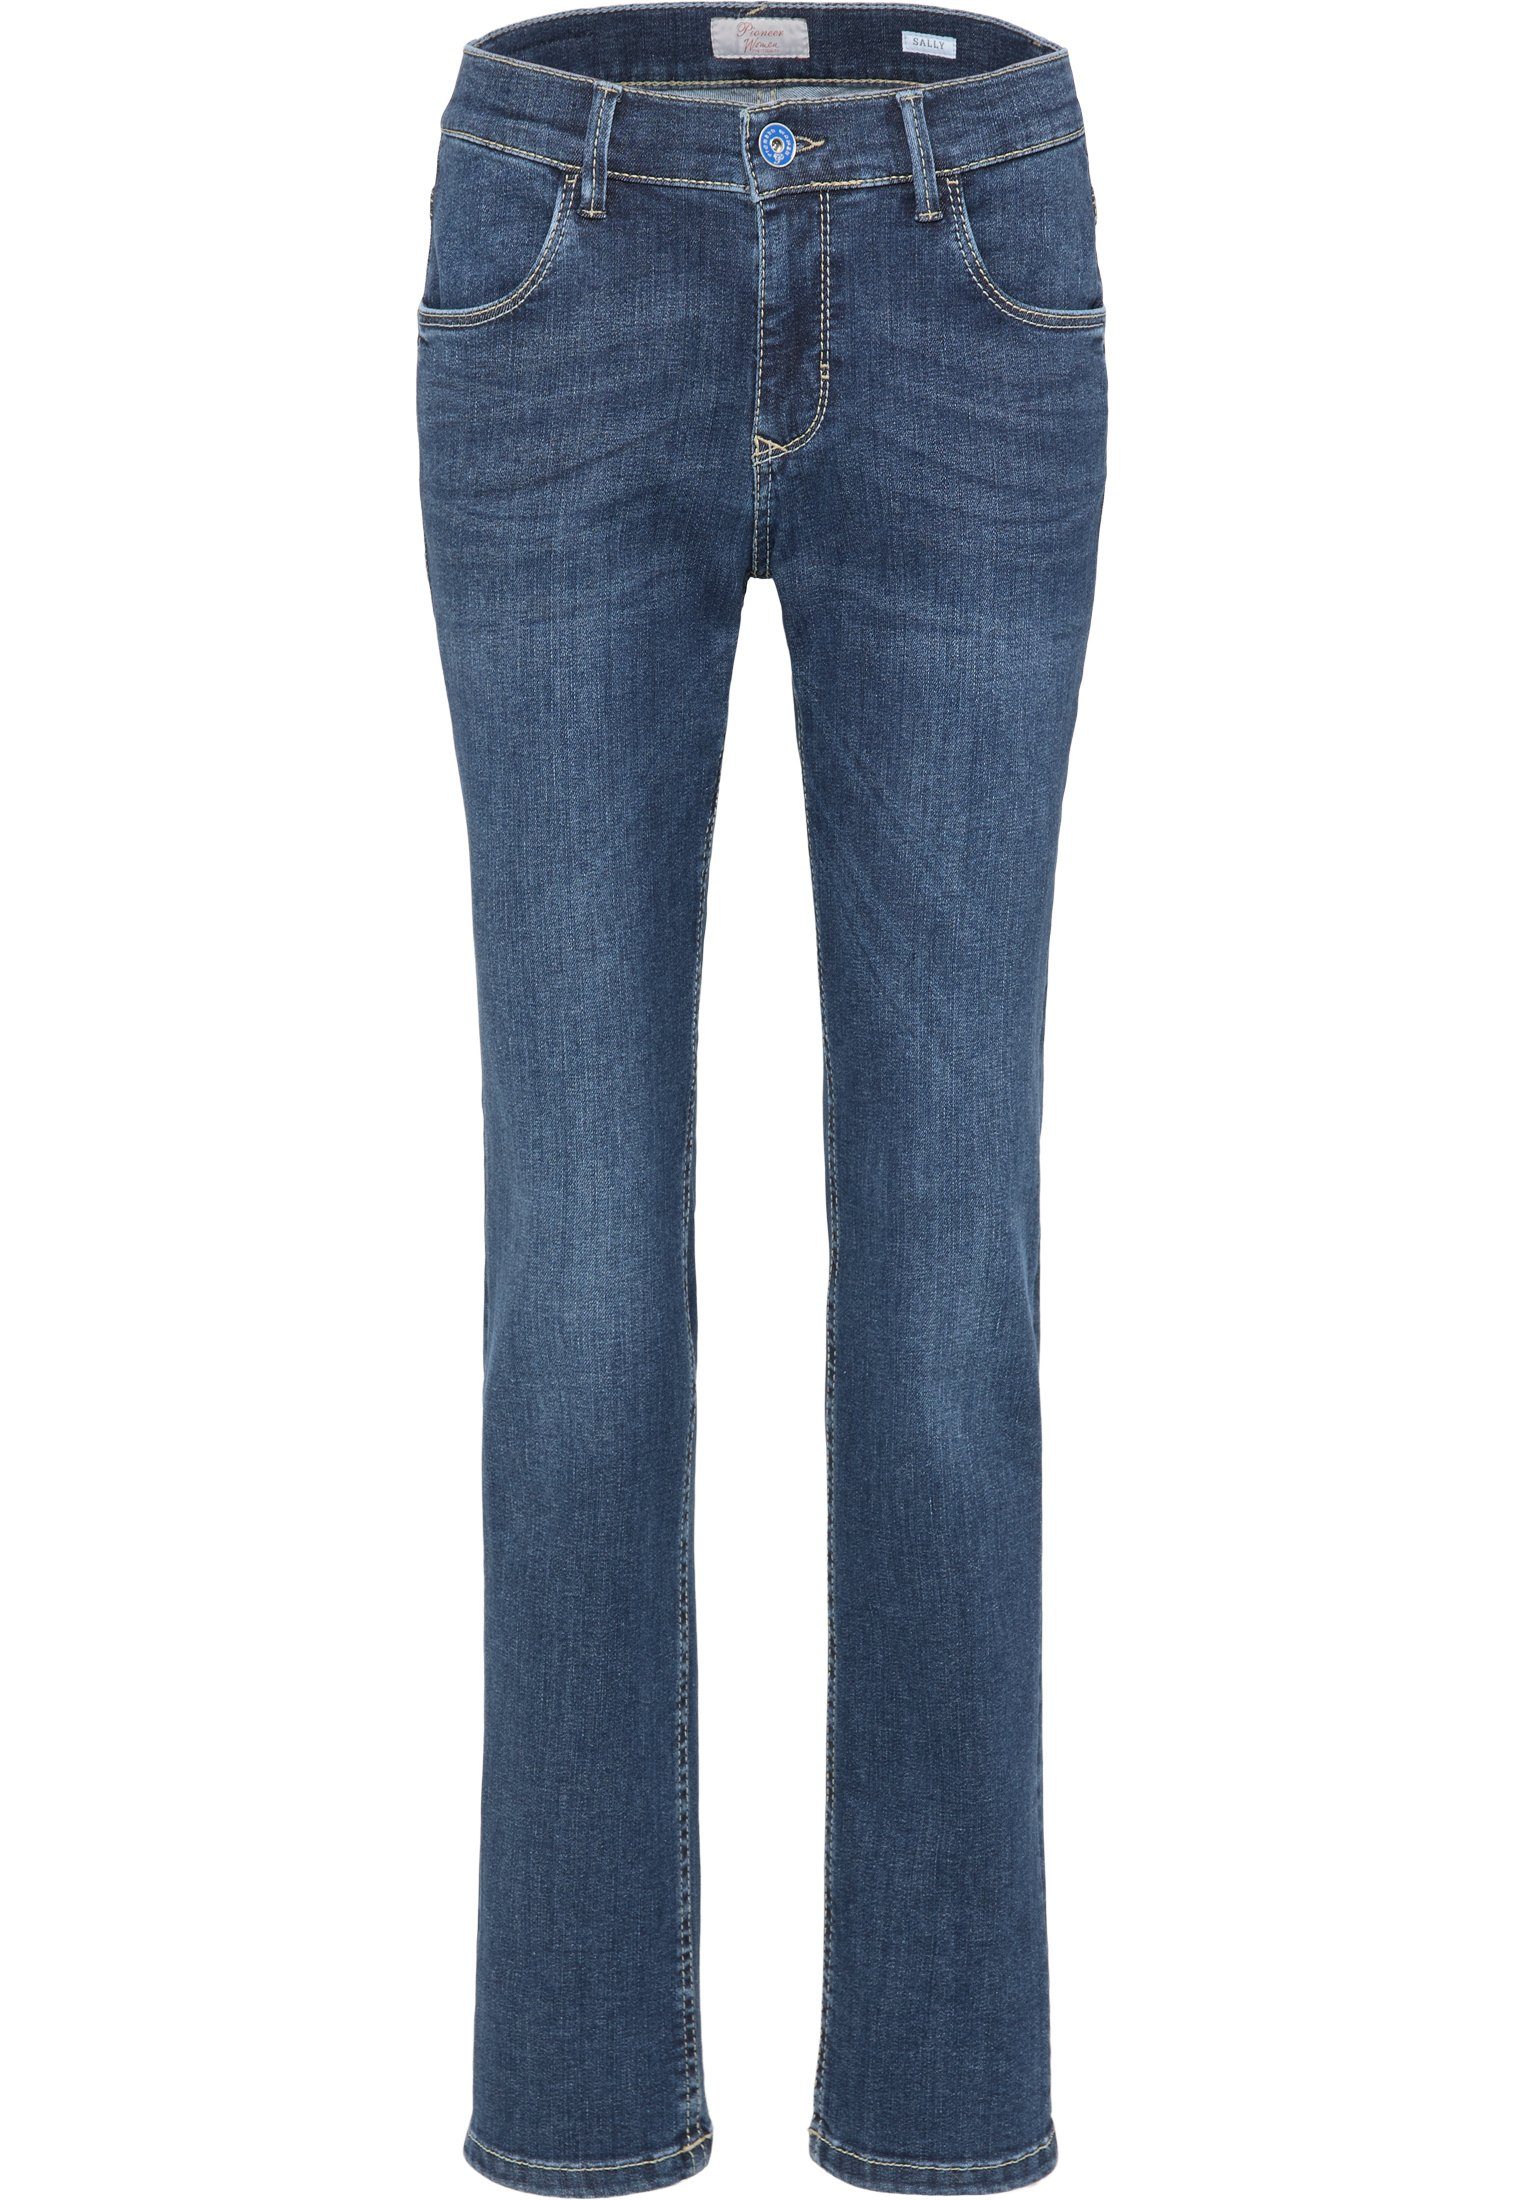 Pioneer Authentic Jeans Stretch-Jeans PIONEER SALLY mid blue used 3290 5010.52 - POWERSTRETCH